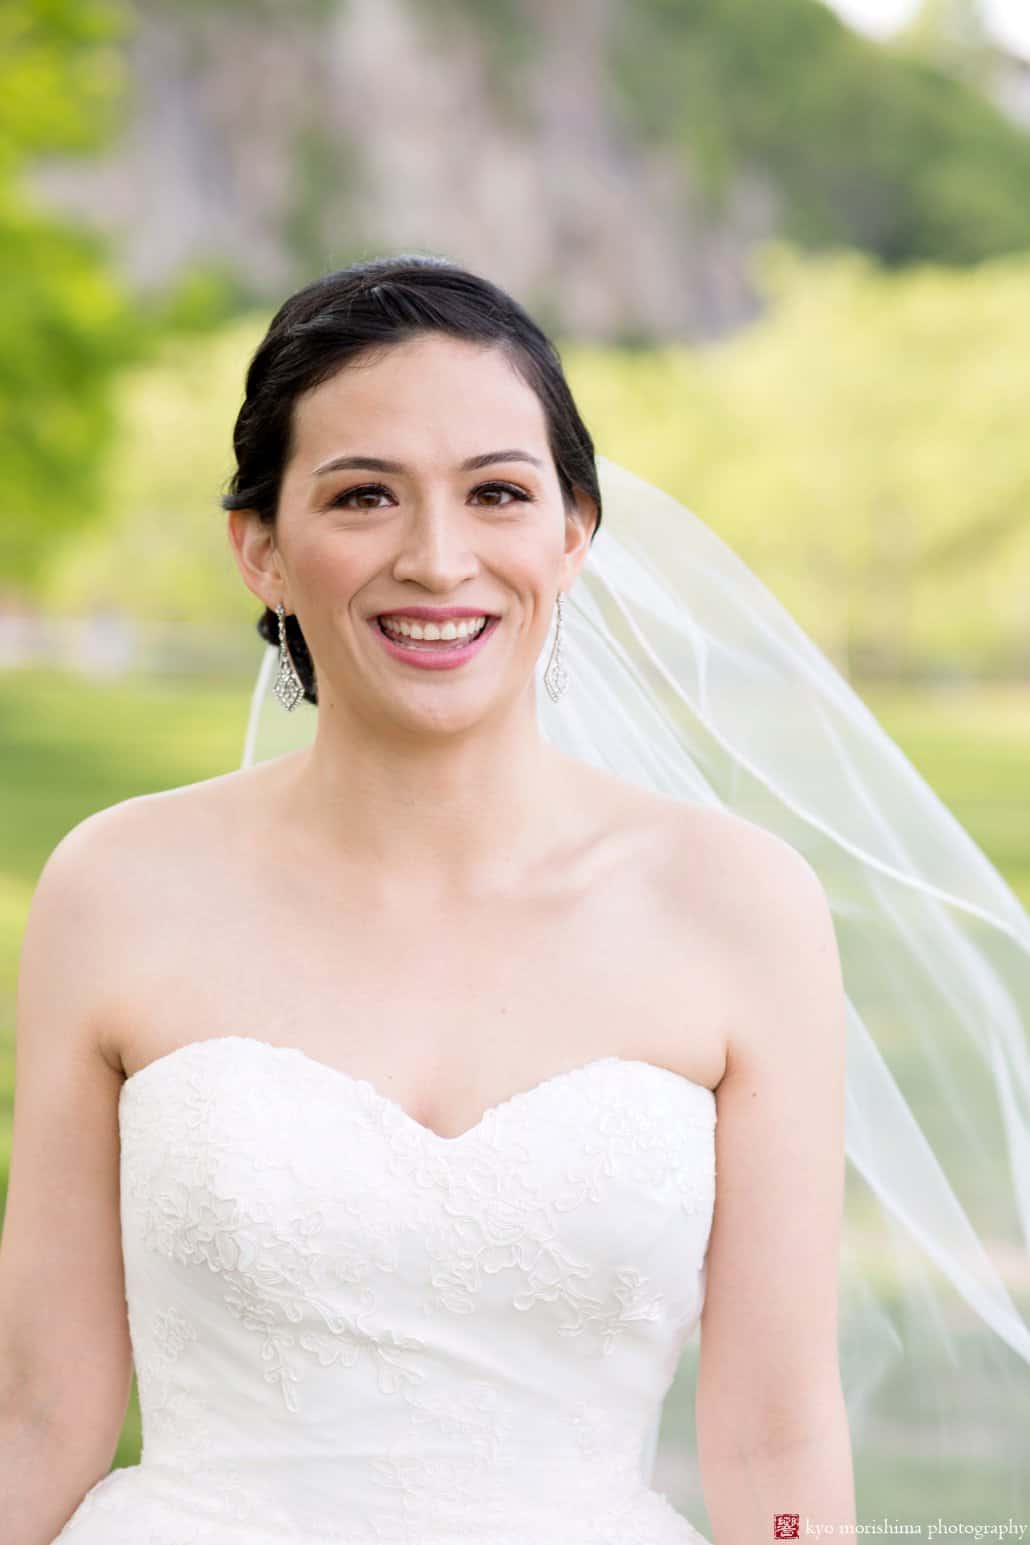 Bride smiles for portrait in Weehawken Waterfront Park, photographed by Kyo Morishima